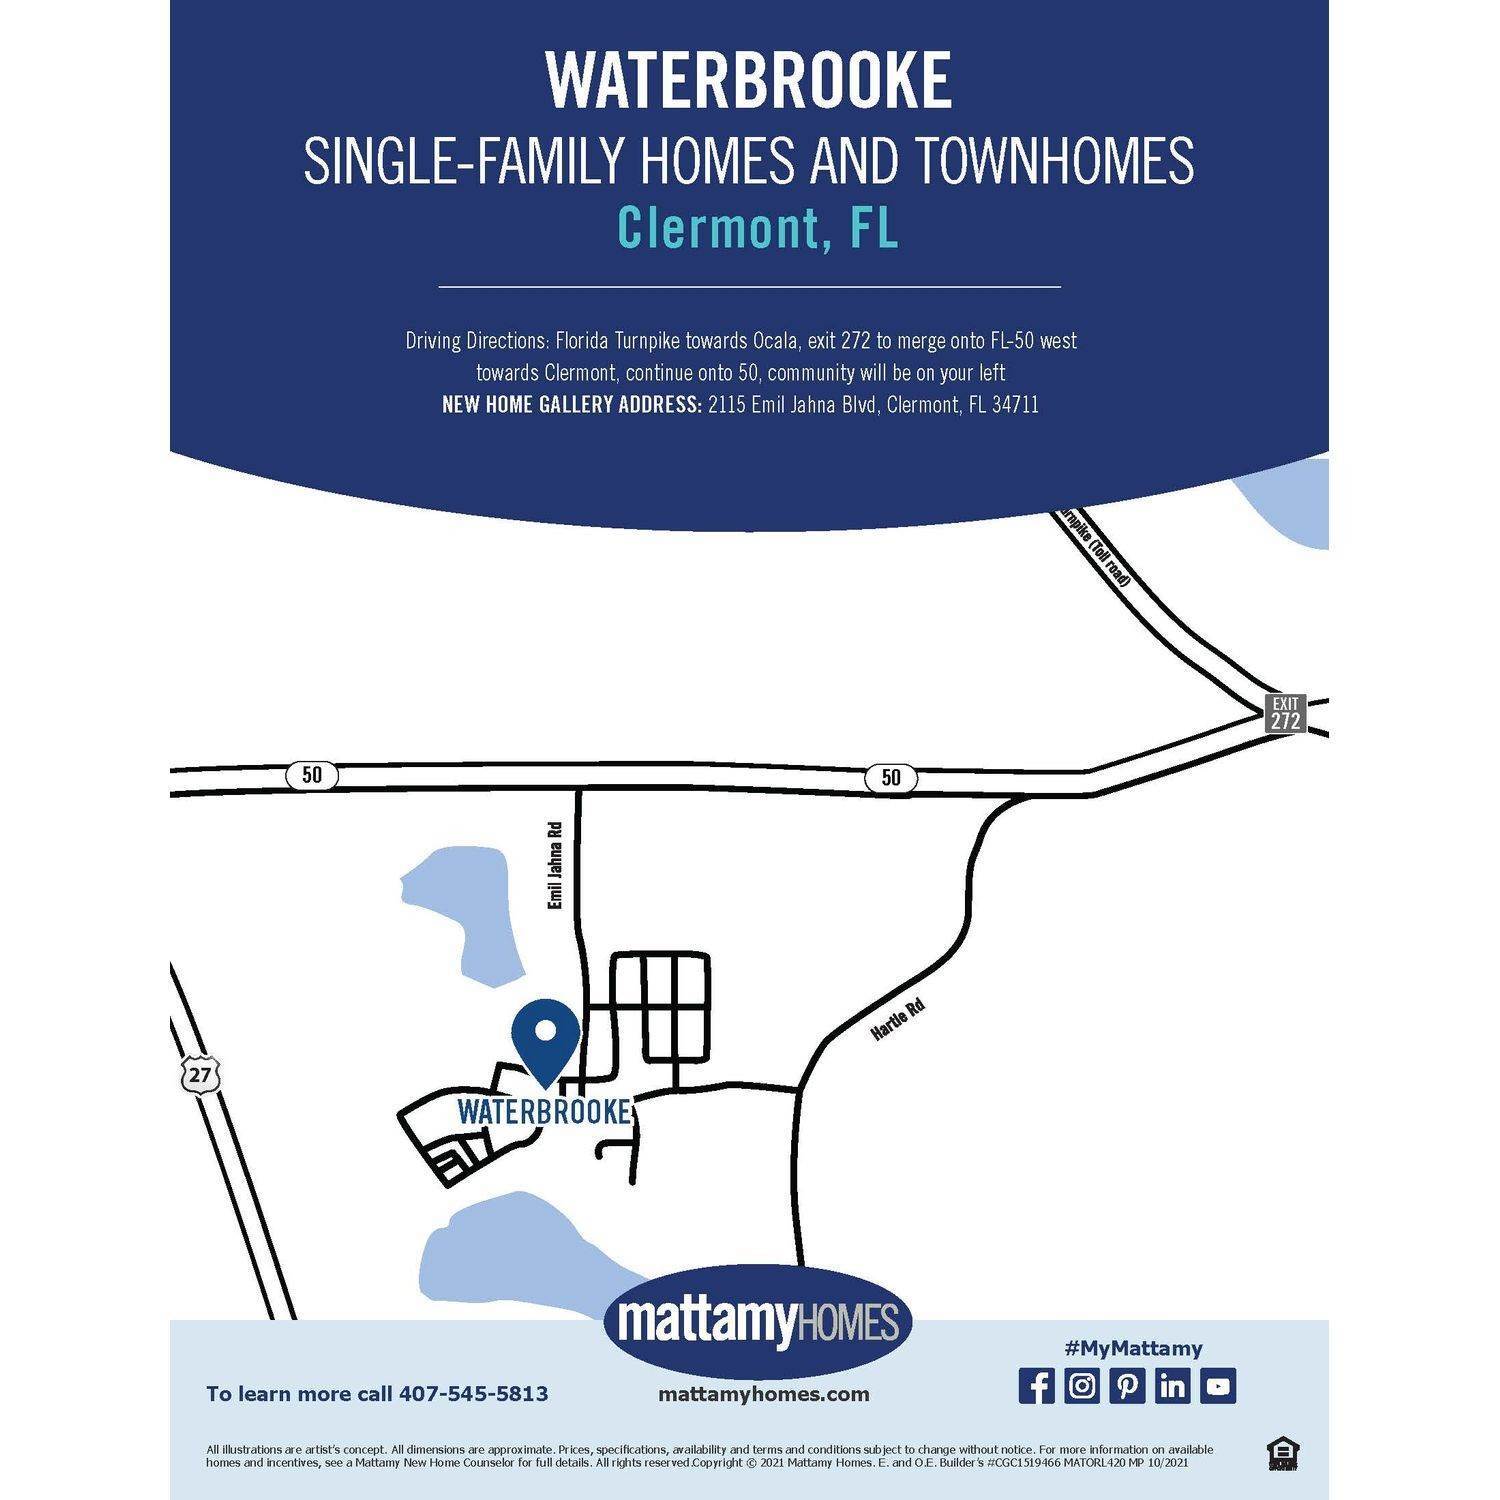 30. Waterbrooke building at 3029 Ambersweet Place, Clermont, FL 34711